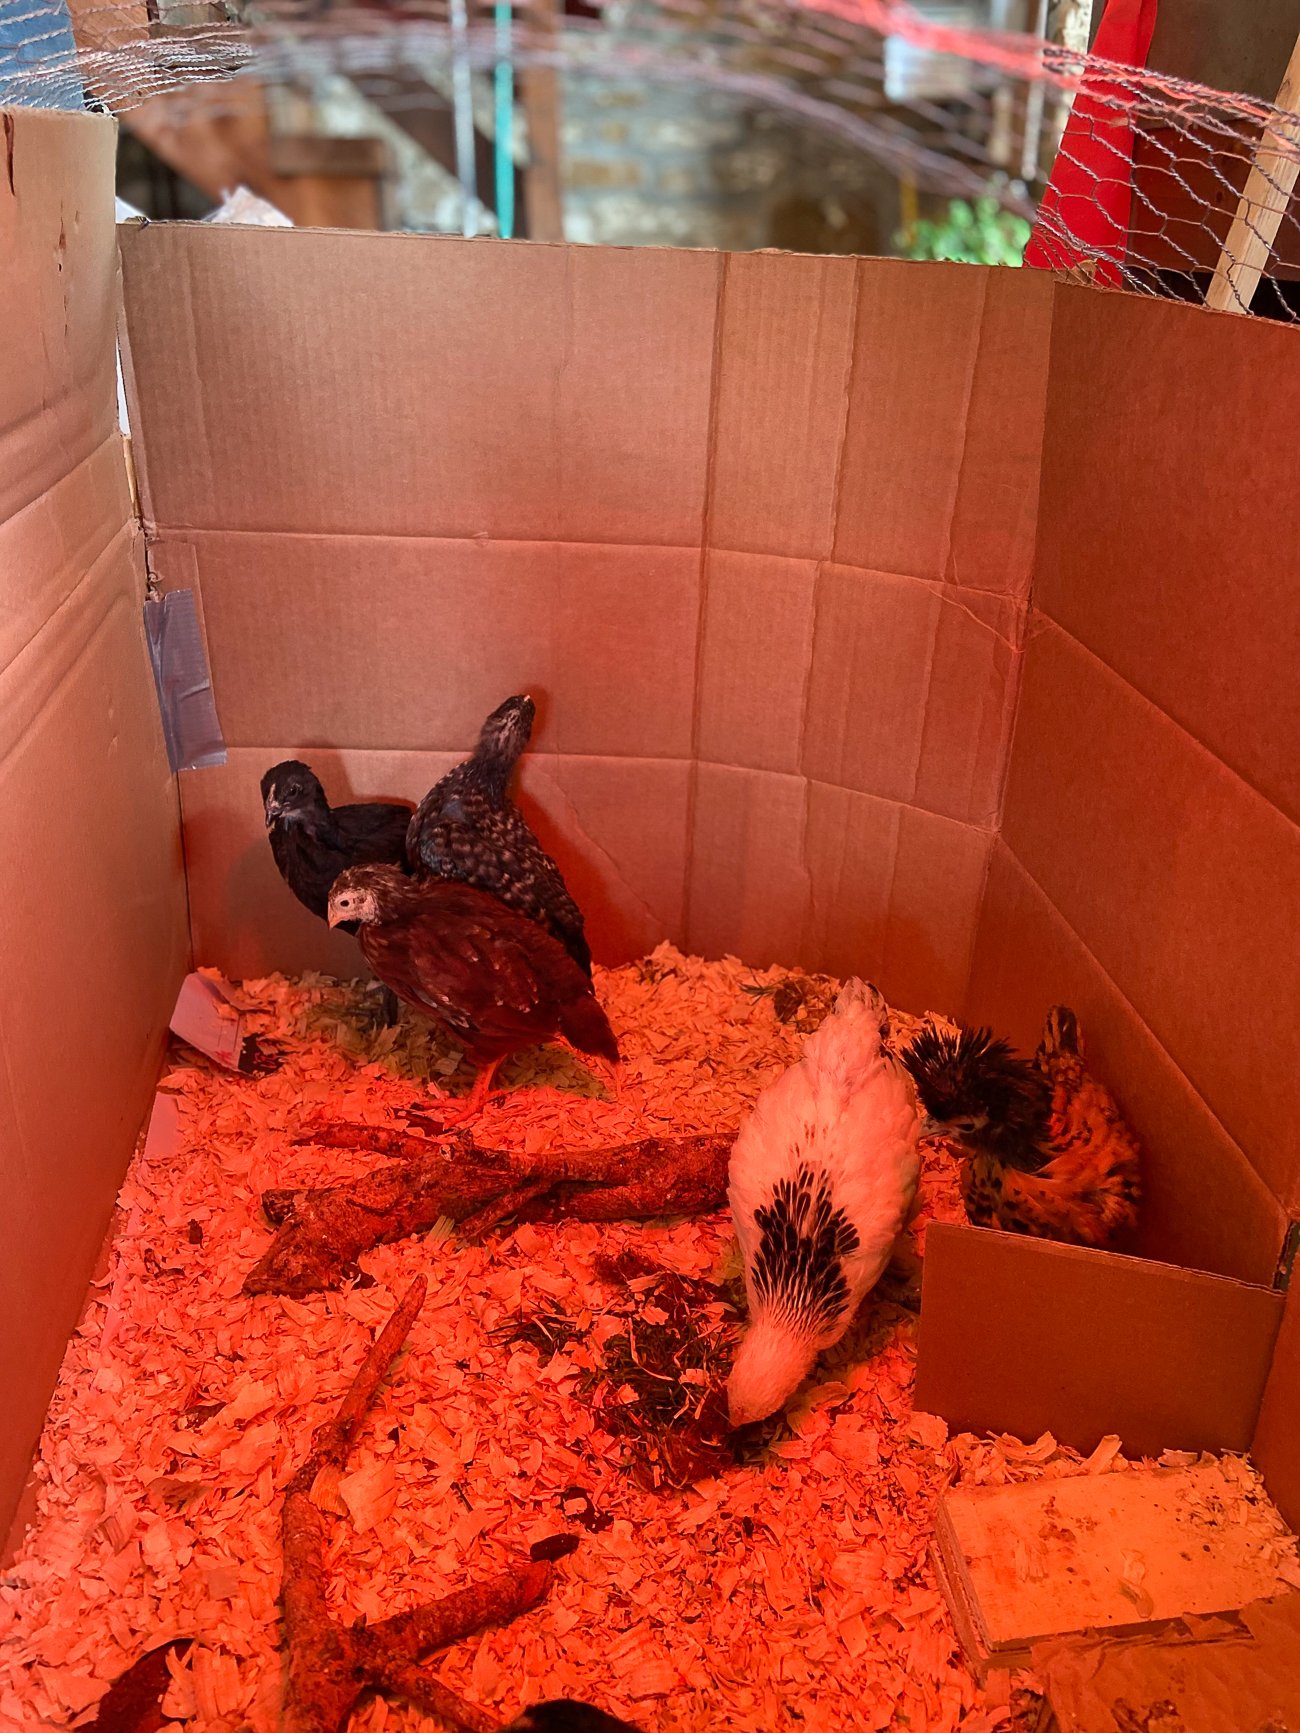 chickens pecking at dirt clumps